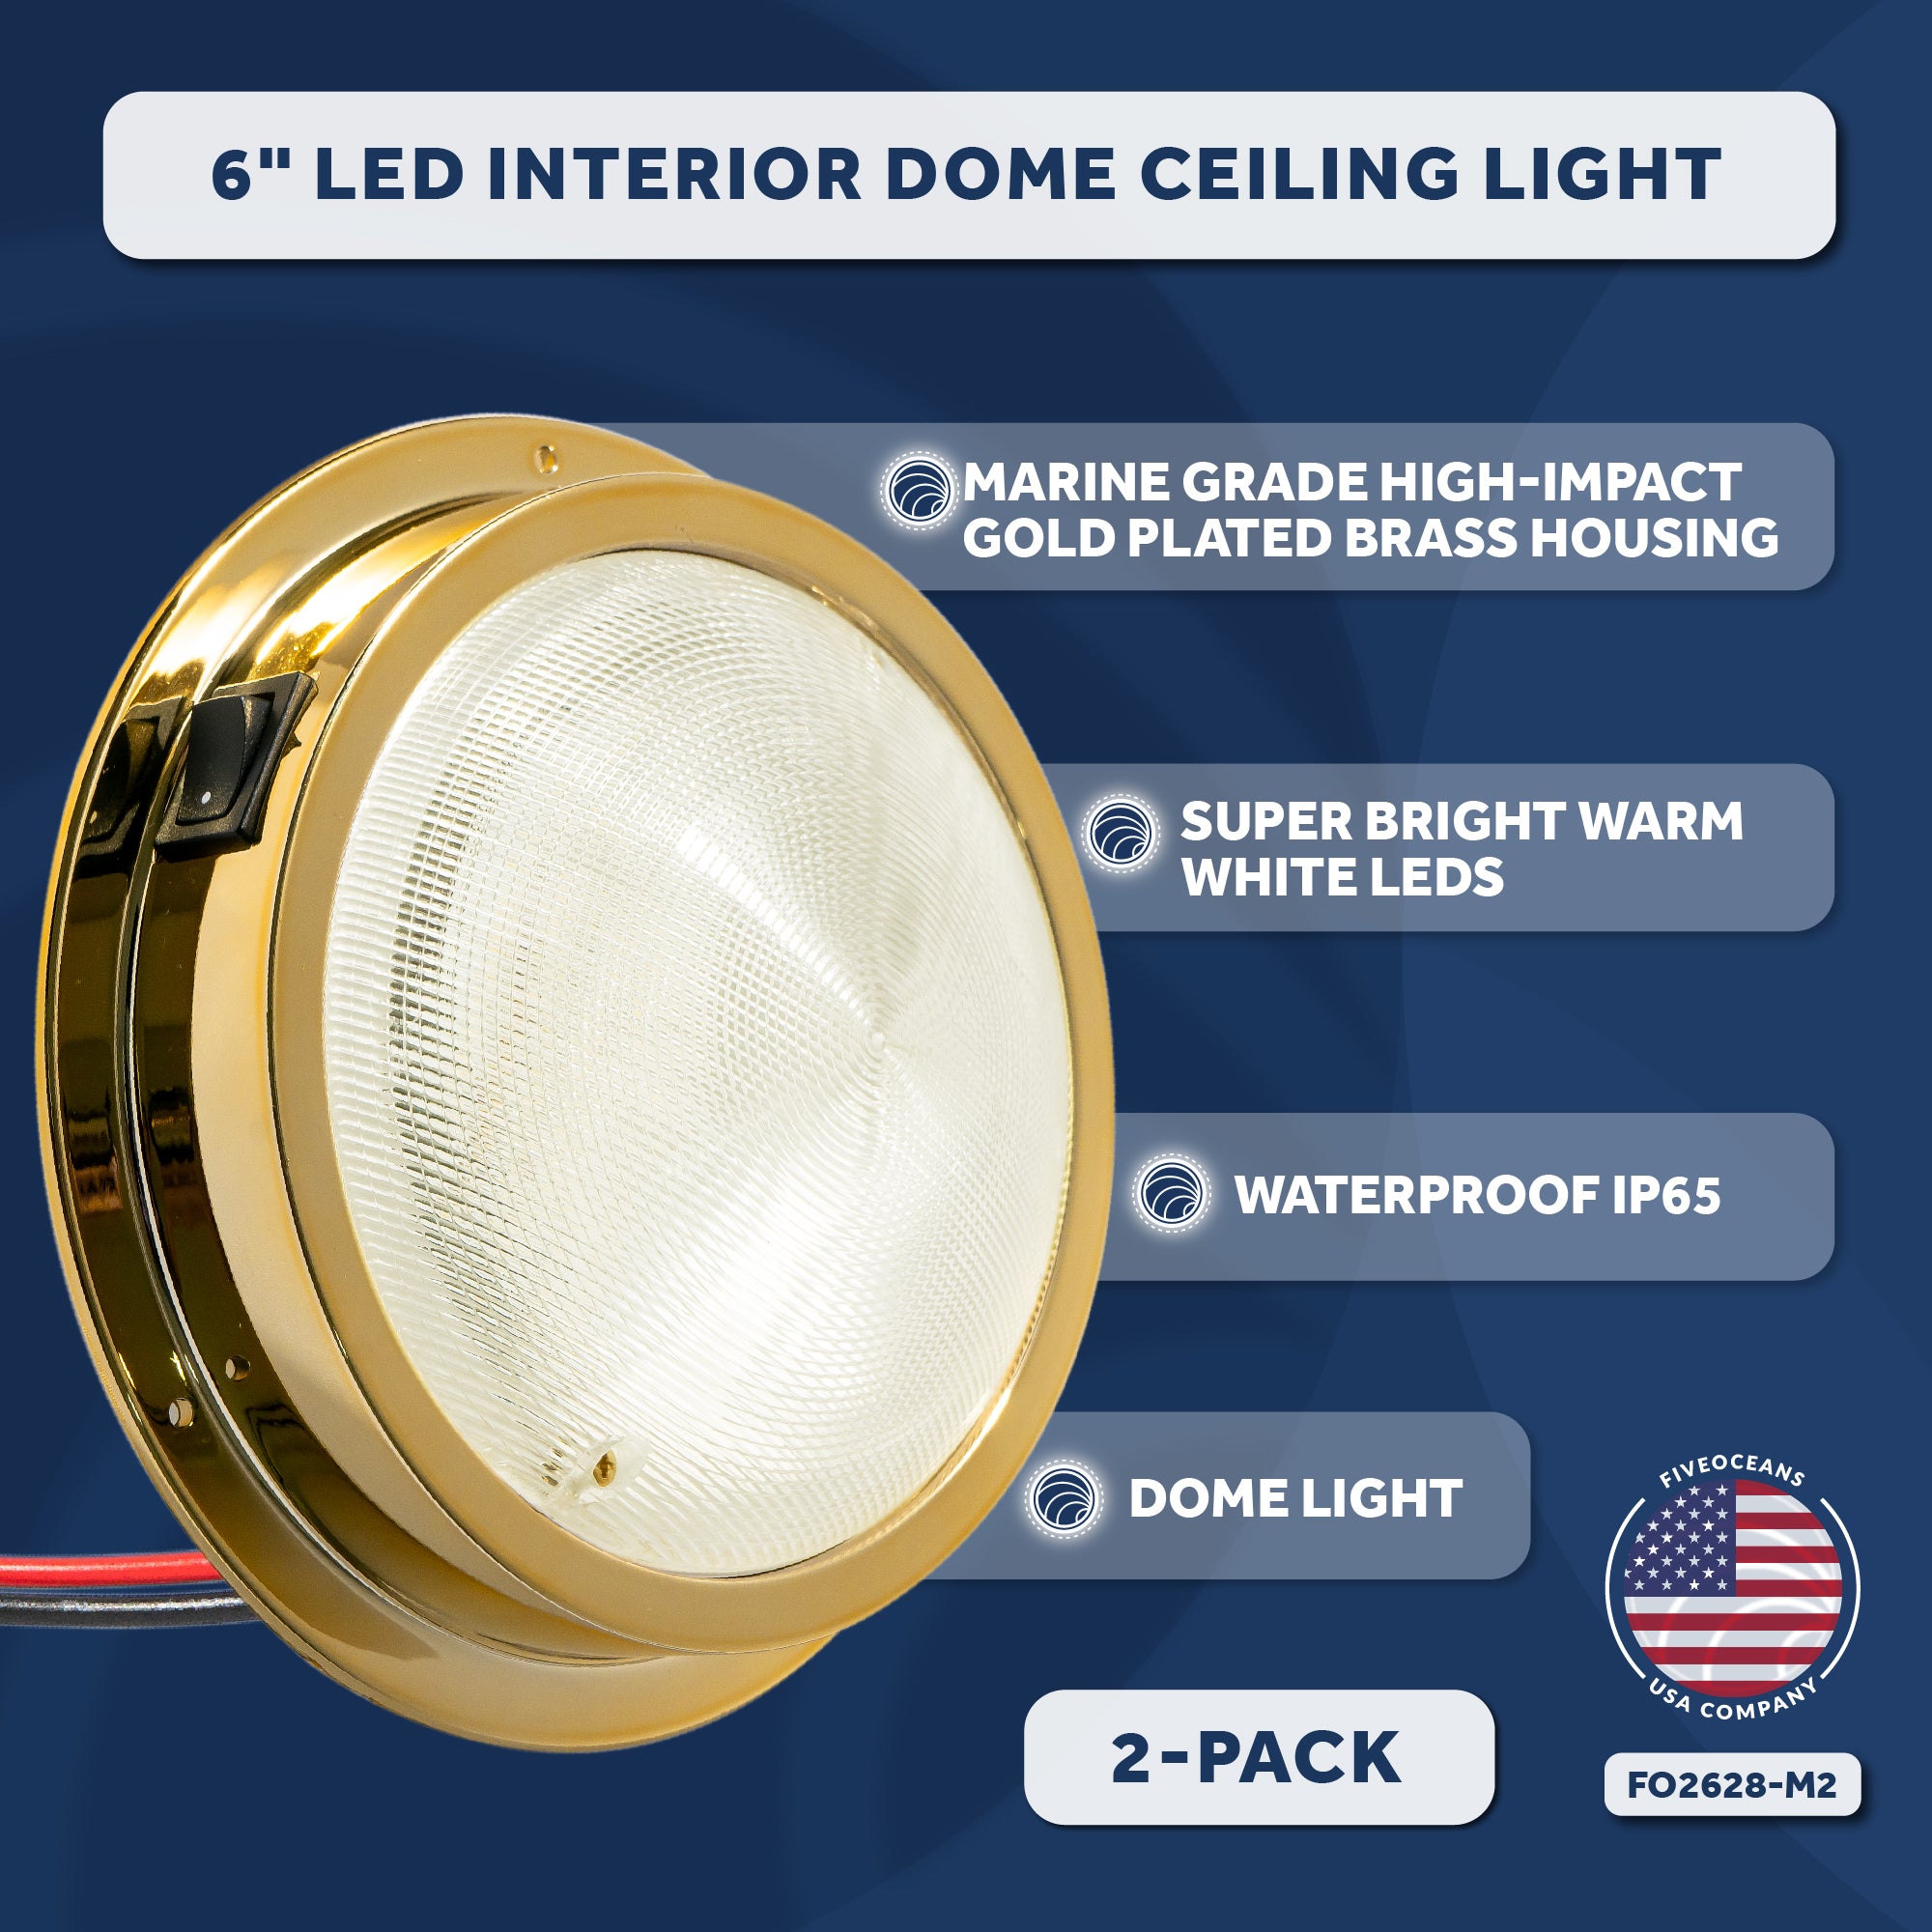 LED Interior Dome Ceiling Light, 6" Surface Mount, Warm White, 2-Pack - FO2628-M2